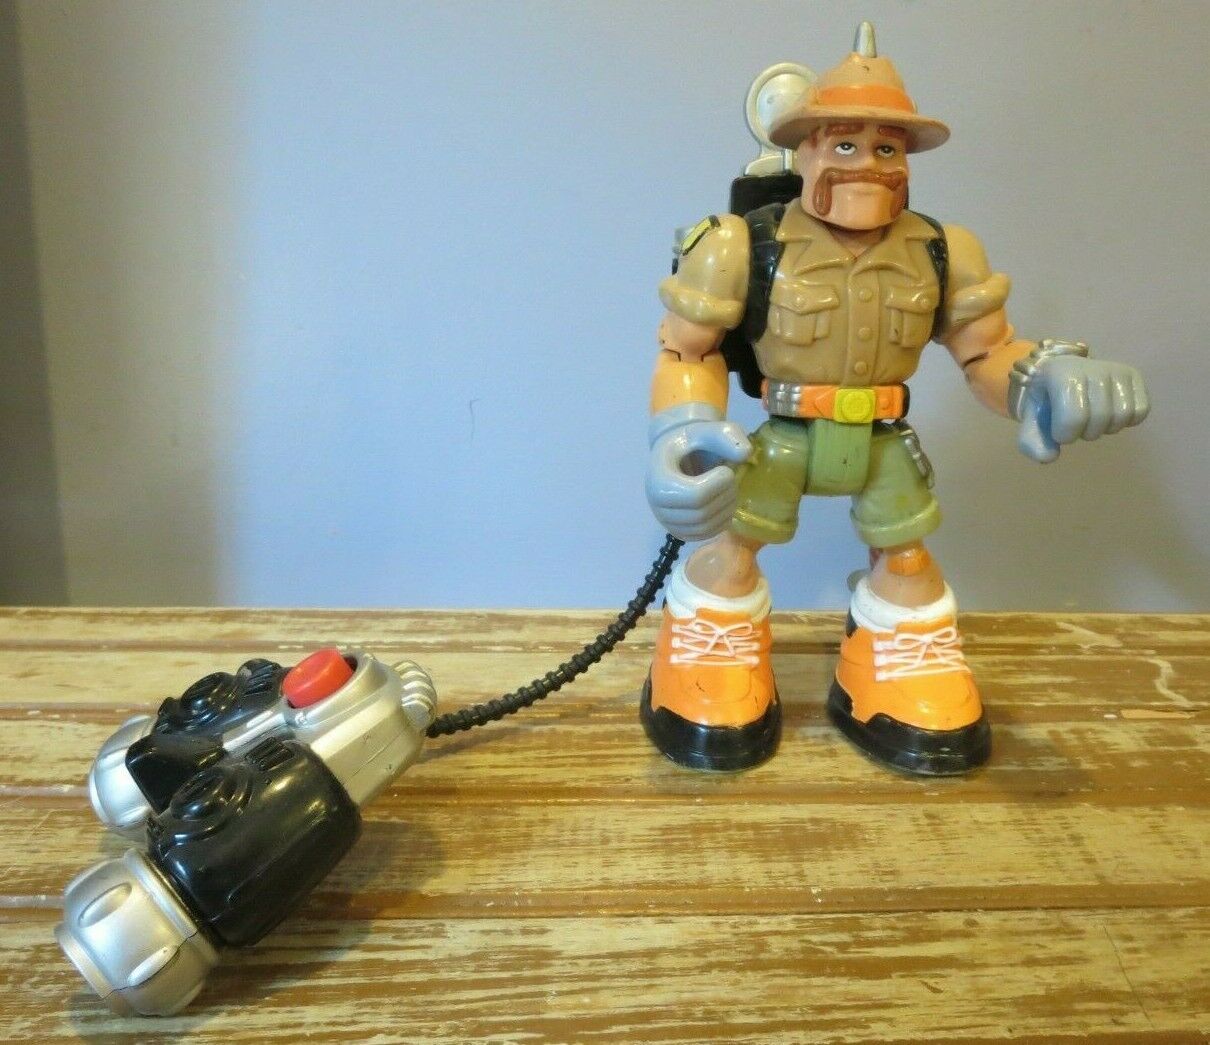 2001 Mattel Fisher Price Rescue Heroes "seymour Wilde" Launch Force